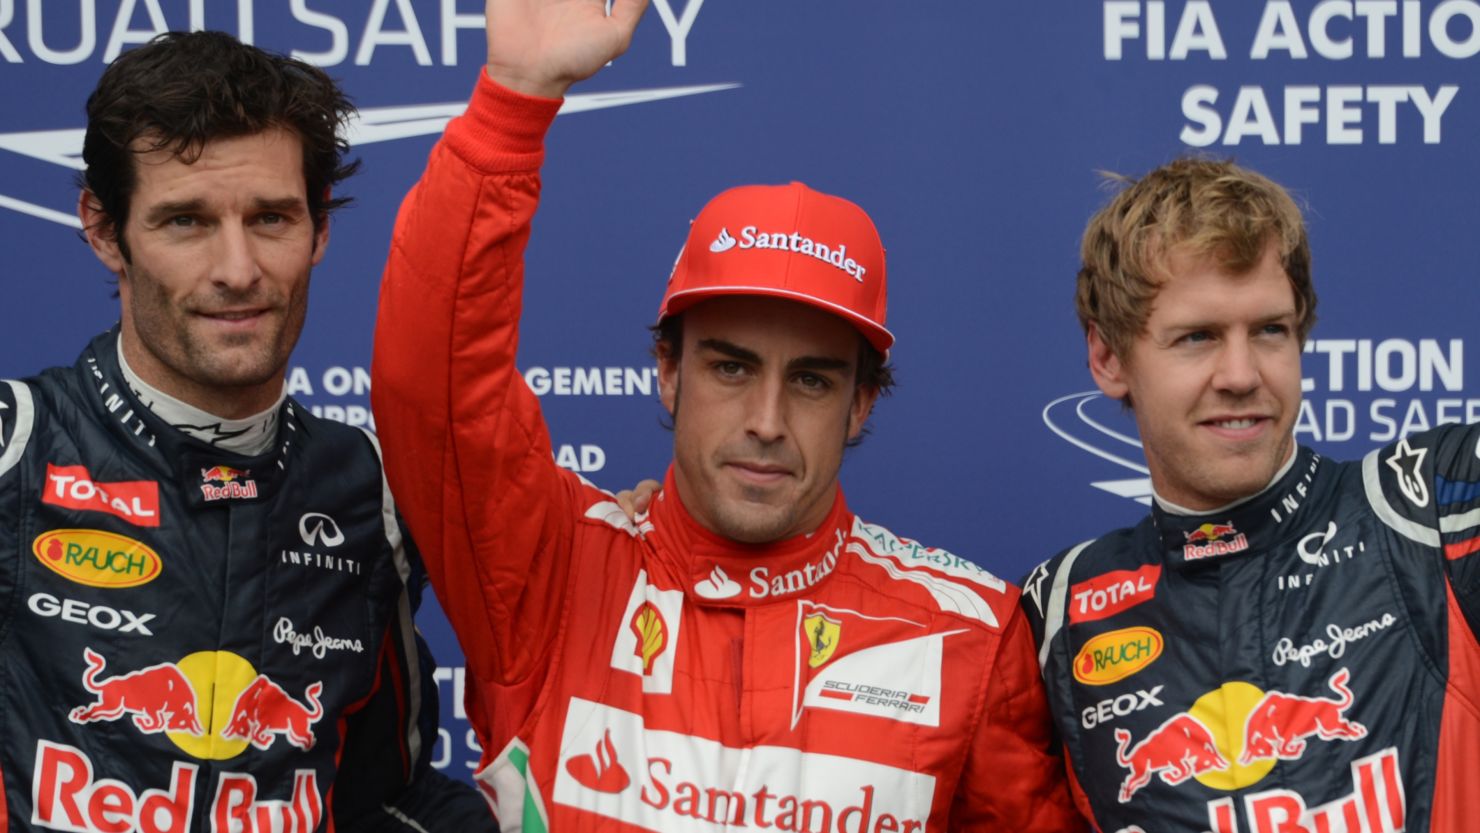 Spain's Fernando Alonso (center) was quickest in Saturday's qualifying session for the German Grand Prix at Hockenheim.